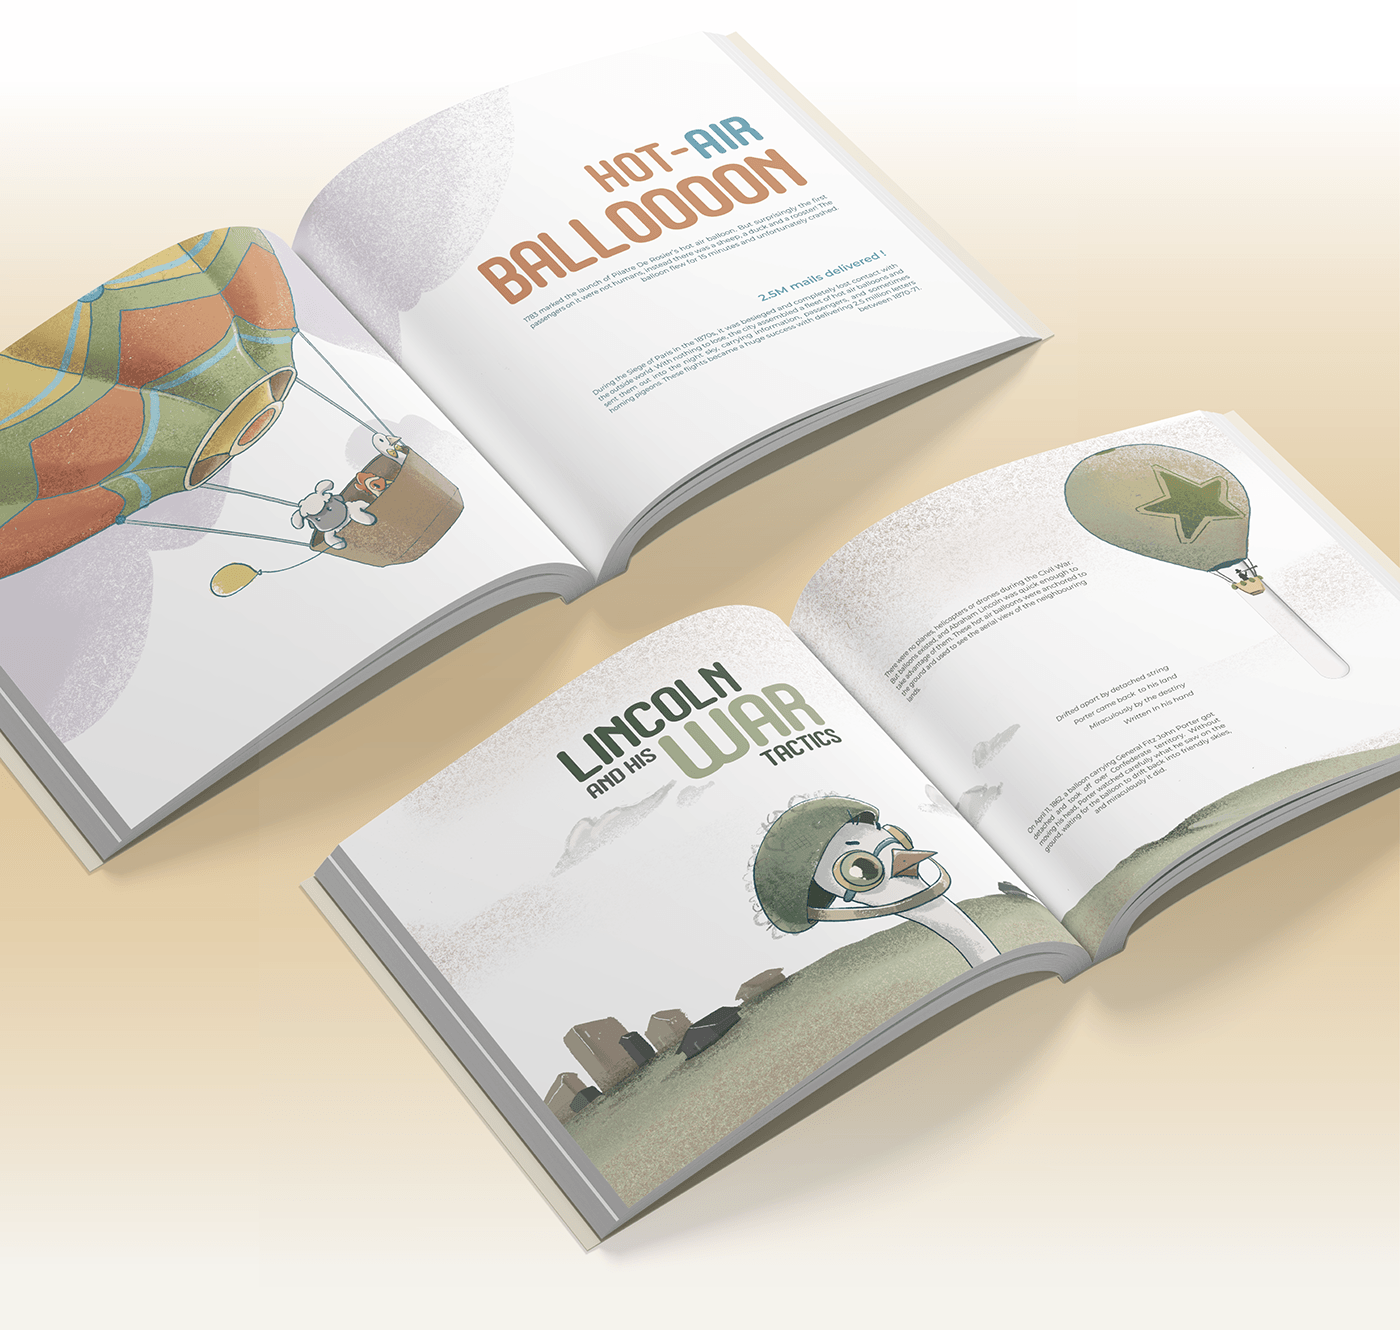 COFFEE TABLE BOOK ILLUSTRATION  balloon balloons ostrich storybook Picture book digital illustration